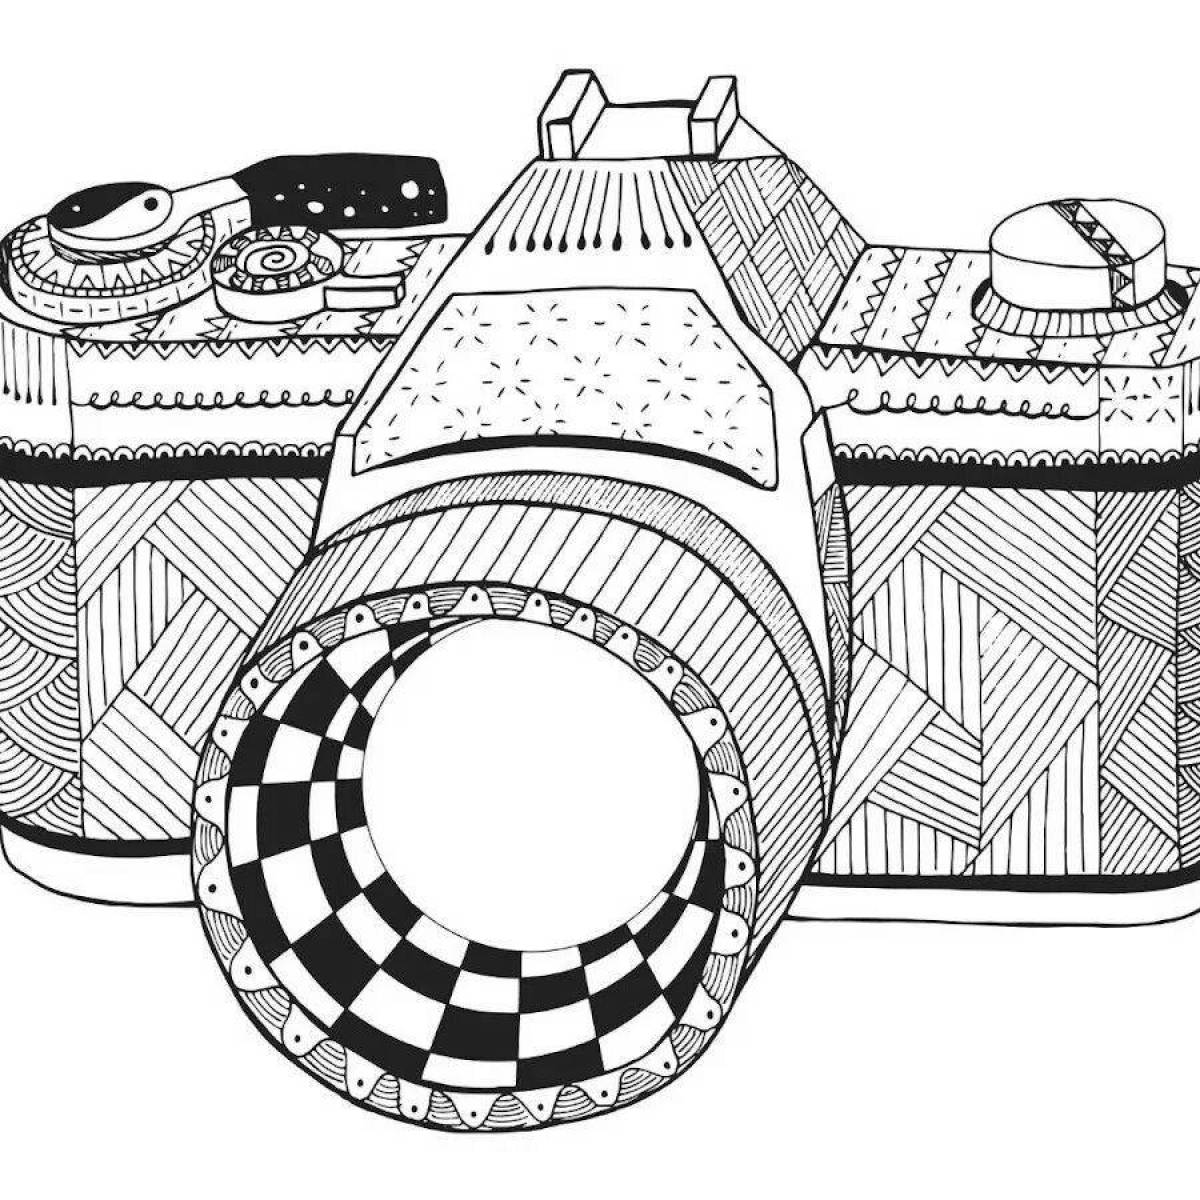 Amazing camera coloring page